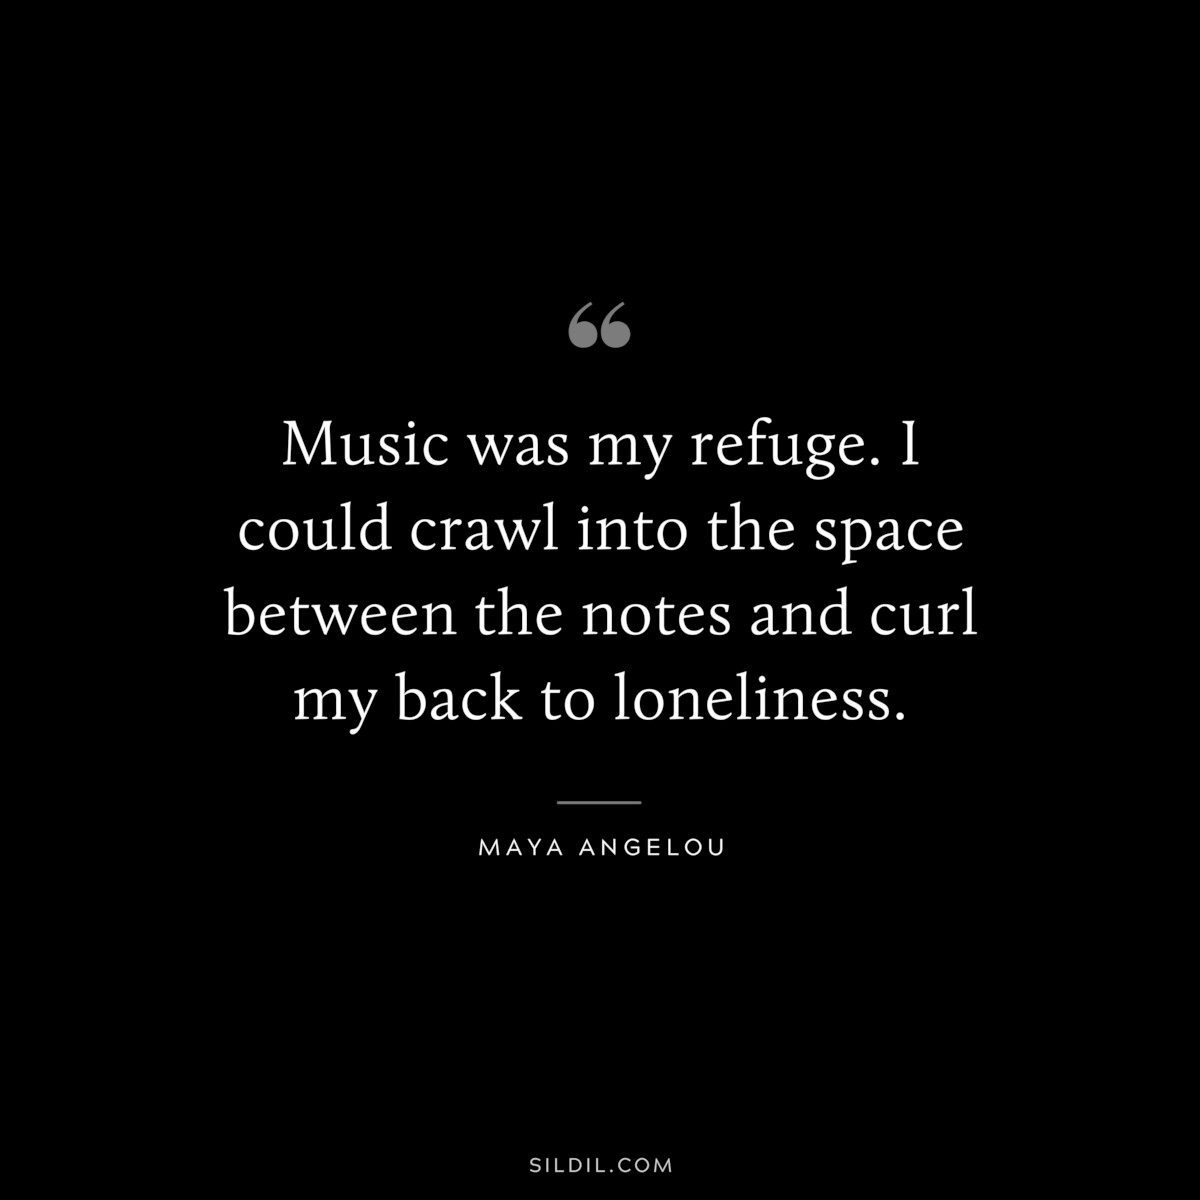 Music was my refuge. I could crawl into the space between the notes and curl my back to loneliness. ― Maya Angelou